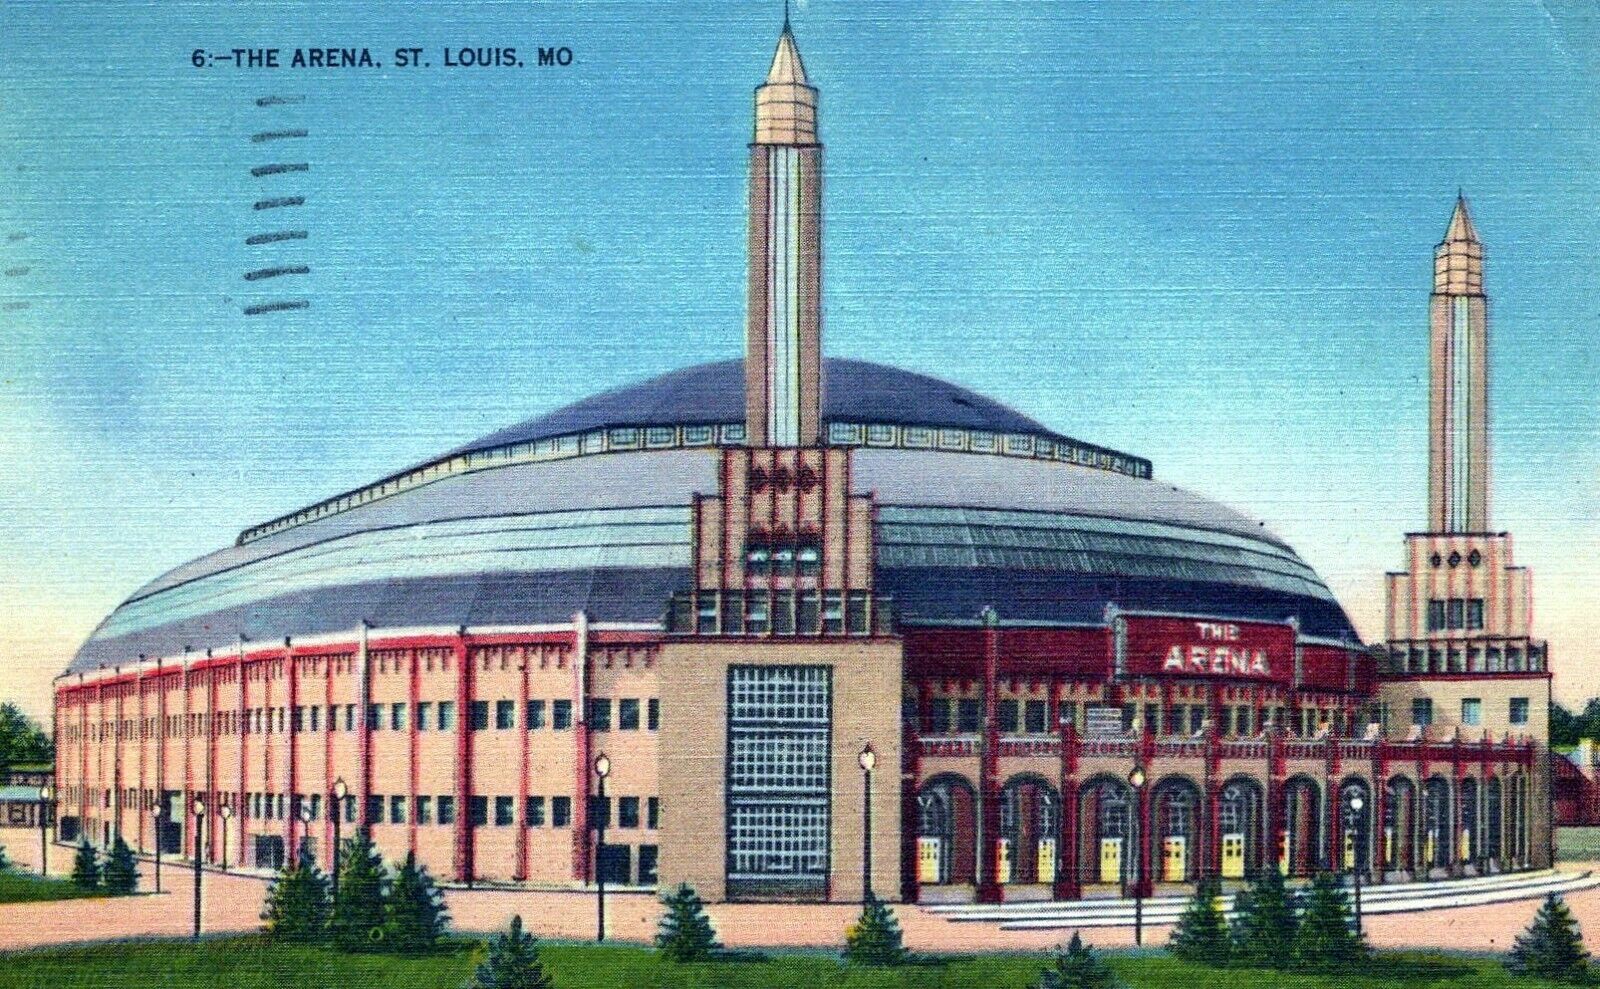 The Arena St Louis Missouri Posted Vintage Linen Post Card 